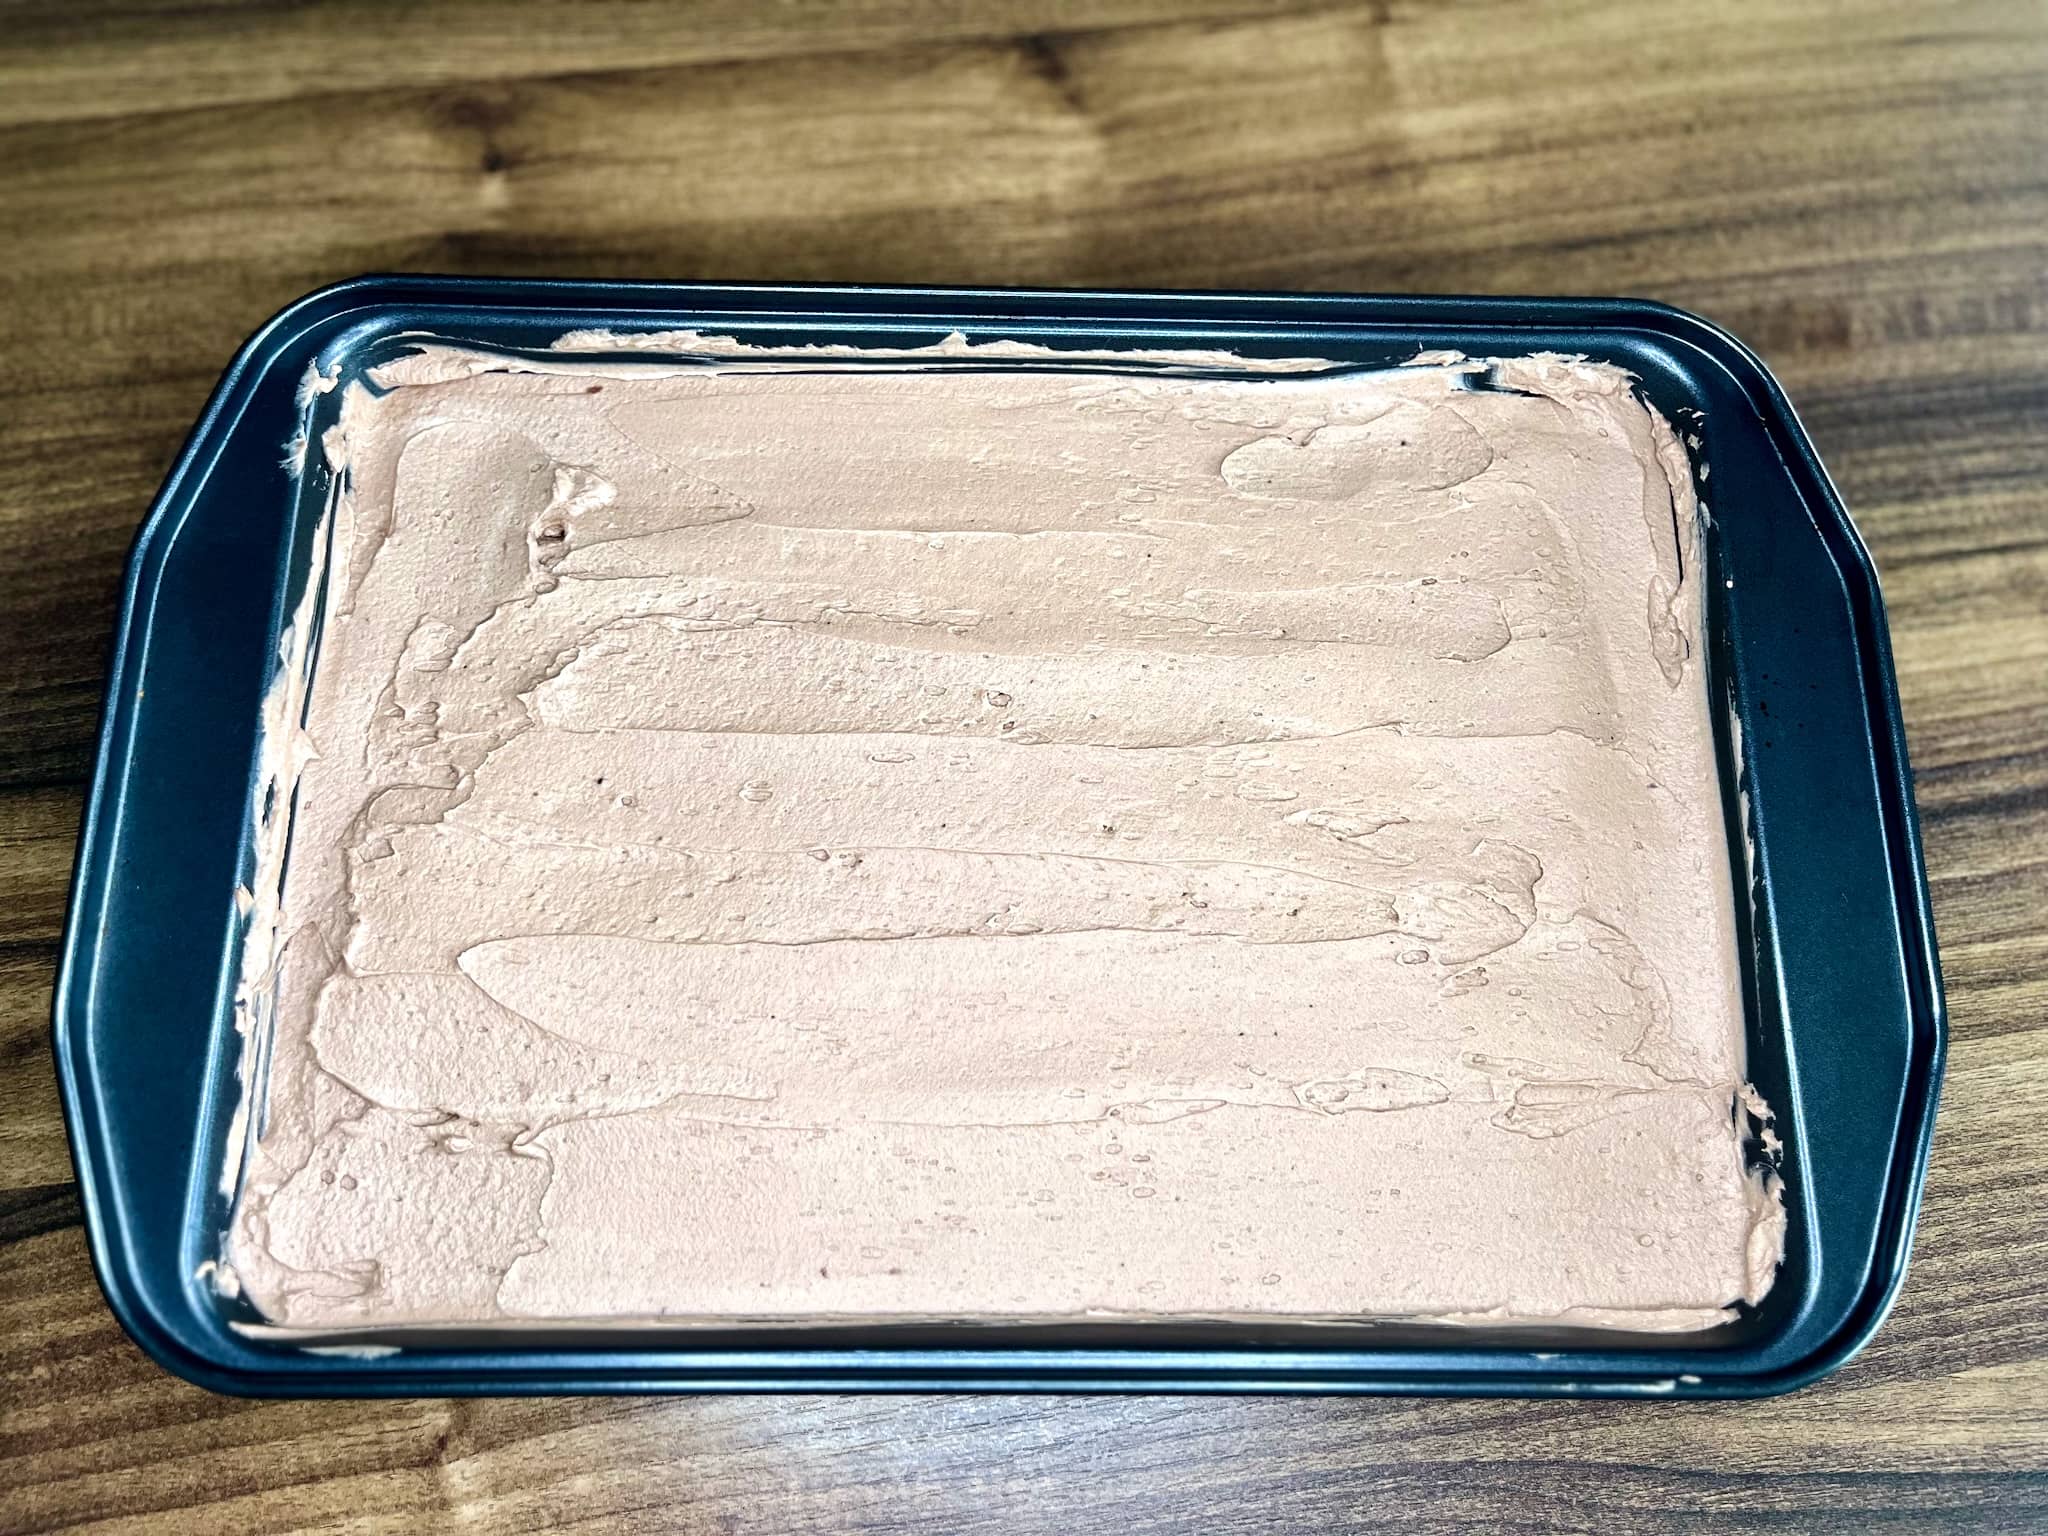 Chocolate filling spooned/poured onto the cake base in a tin